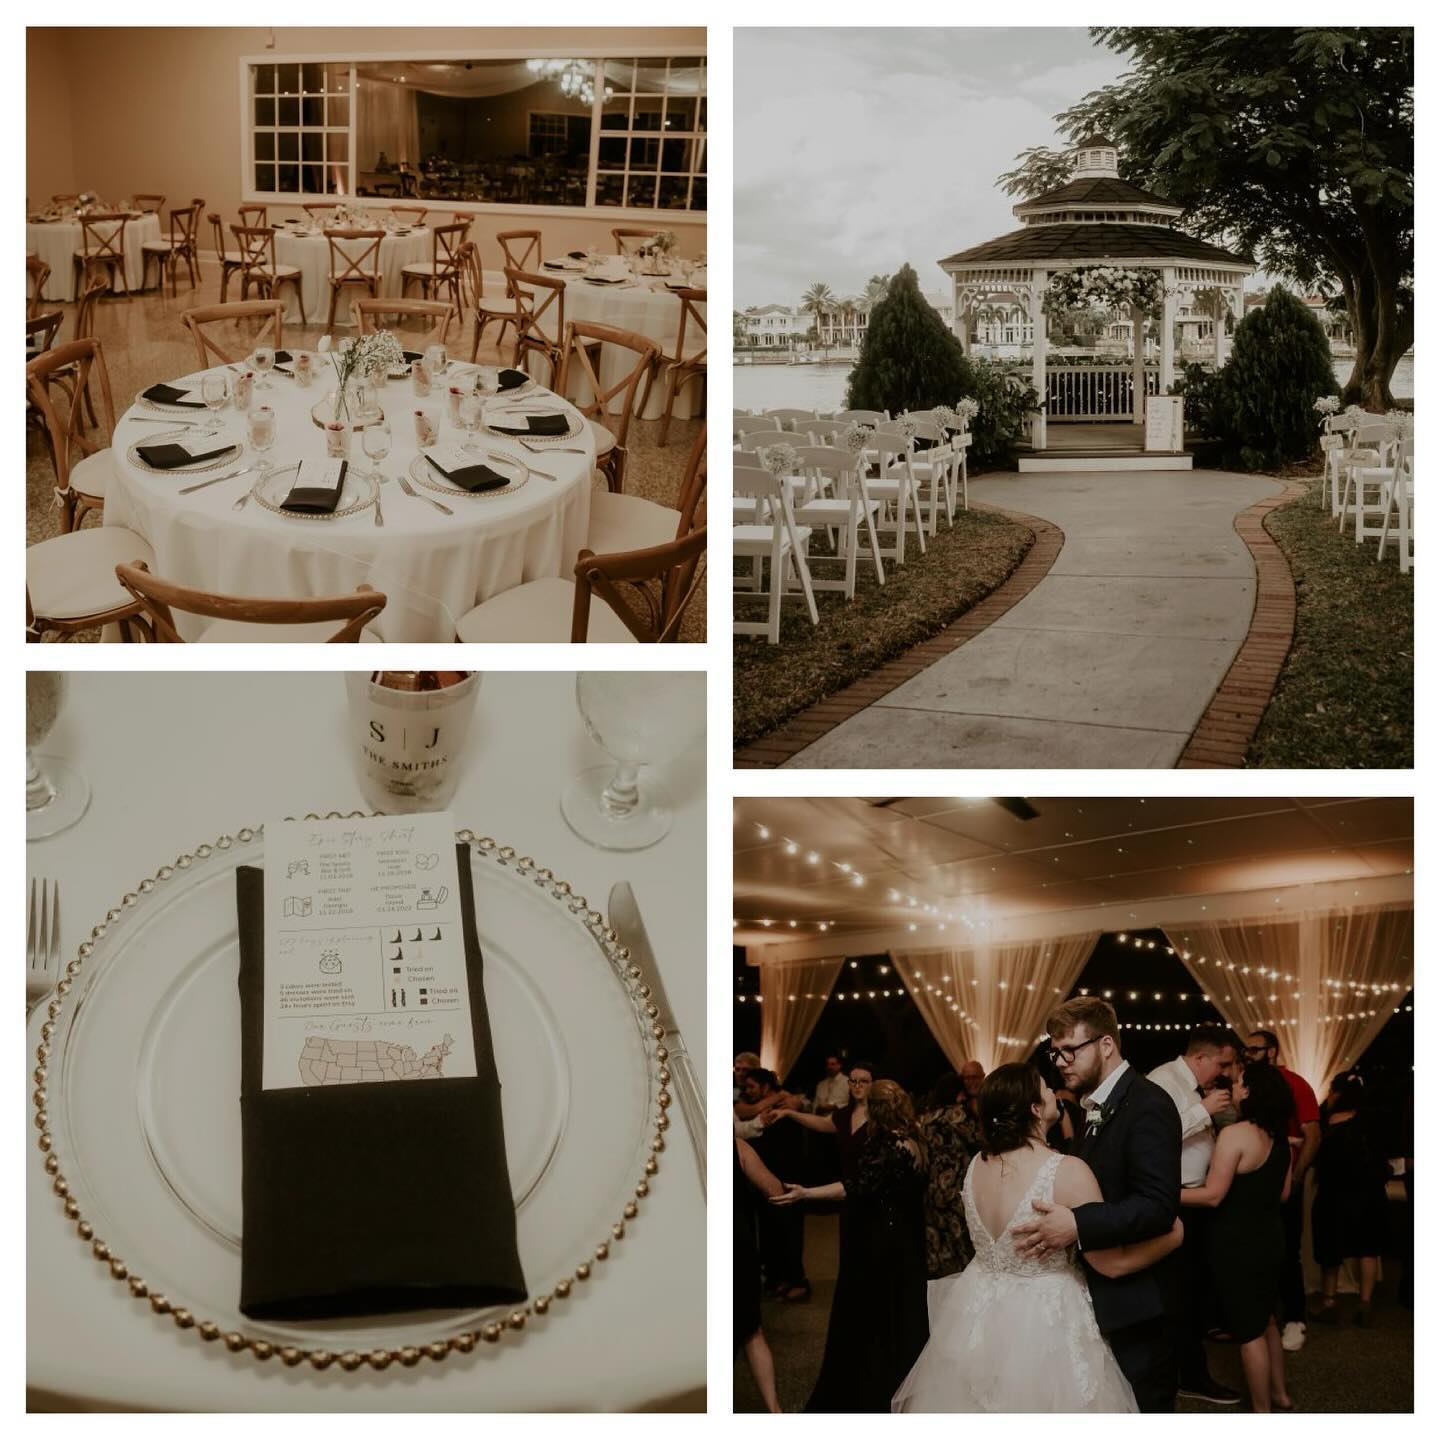 We love working at The Davis Islands Garden Club! For this wedding, we provided the Market Lighting, White Garden Chairs